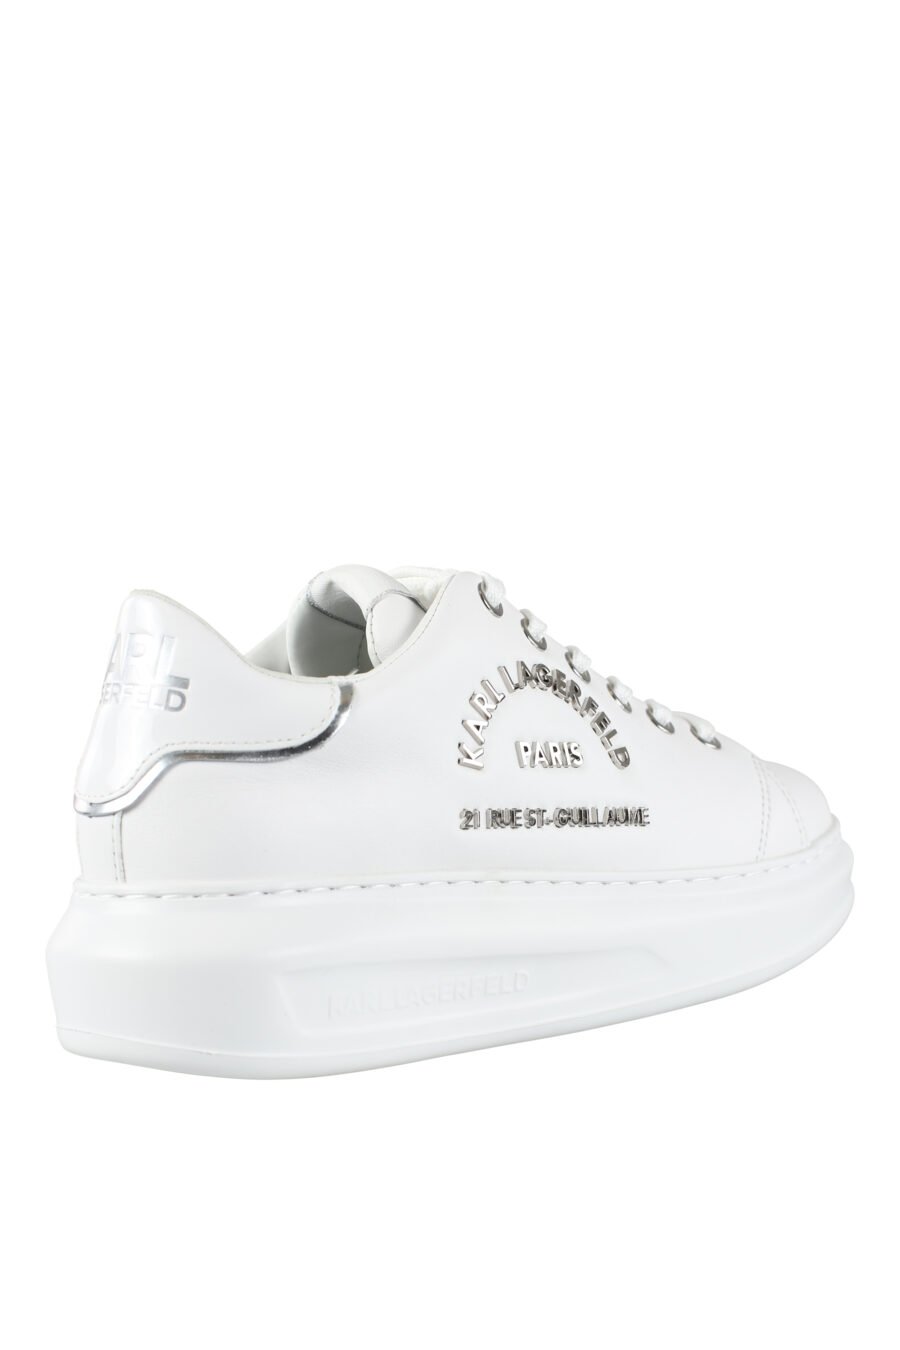 White trainers with silver lettering logo "rue st guillaume" - IMG 9567 1